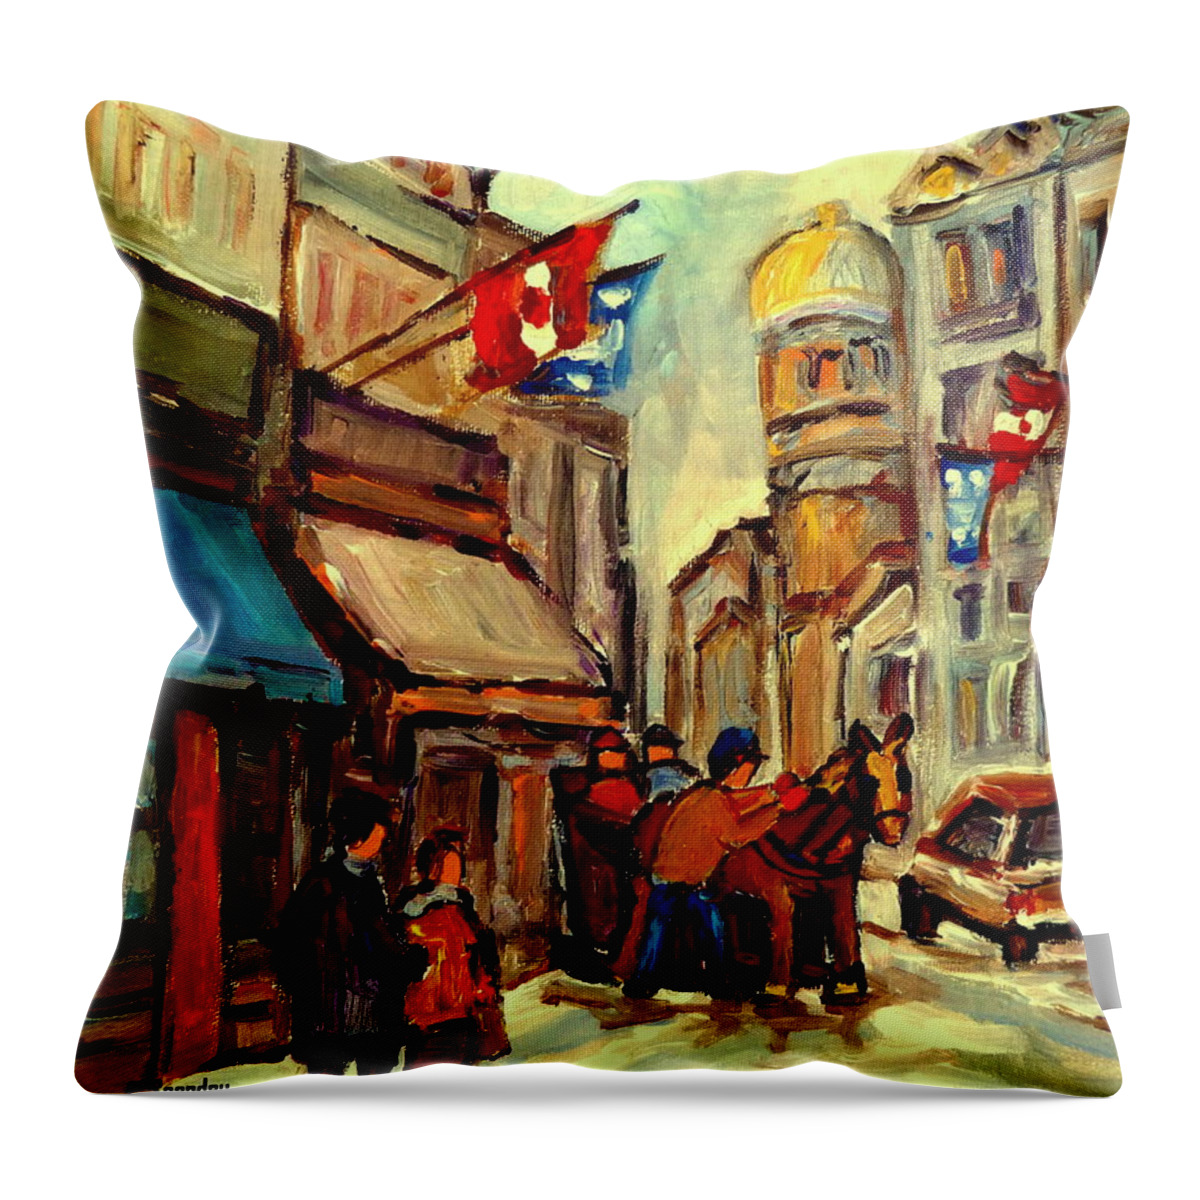 Montreal Throw Pillow featuring the painting Old Montreal Rue St Paul Winterscene With Caleche by Carole Spandau